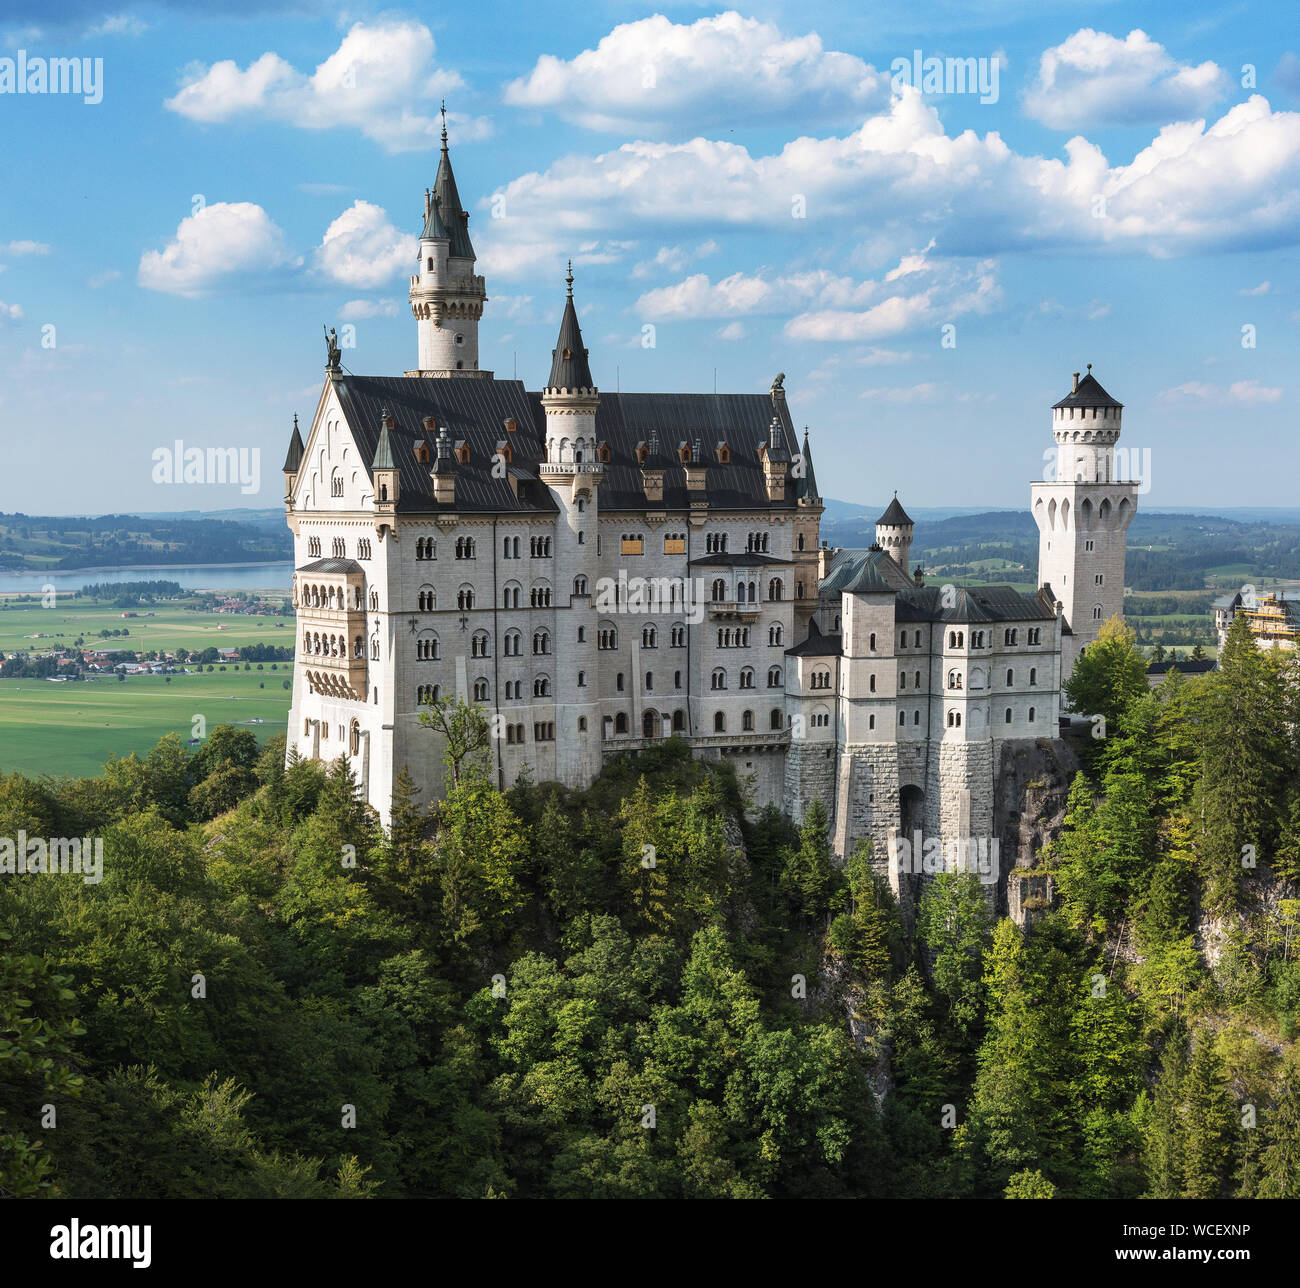 Summer, vertical frame of the romantic Neuschwanstein castle - famous Europe, and German Landmark in style of Romanesque Revival architecture located Stock Photo